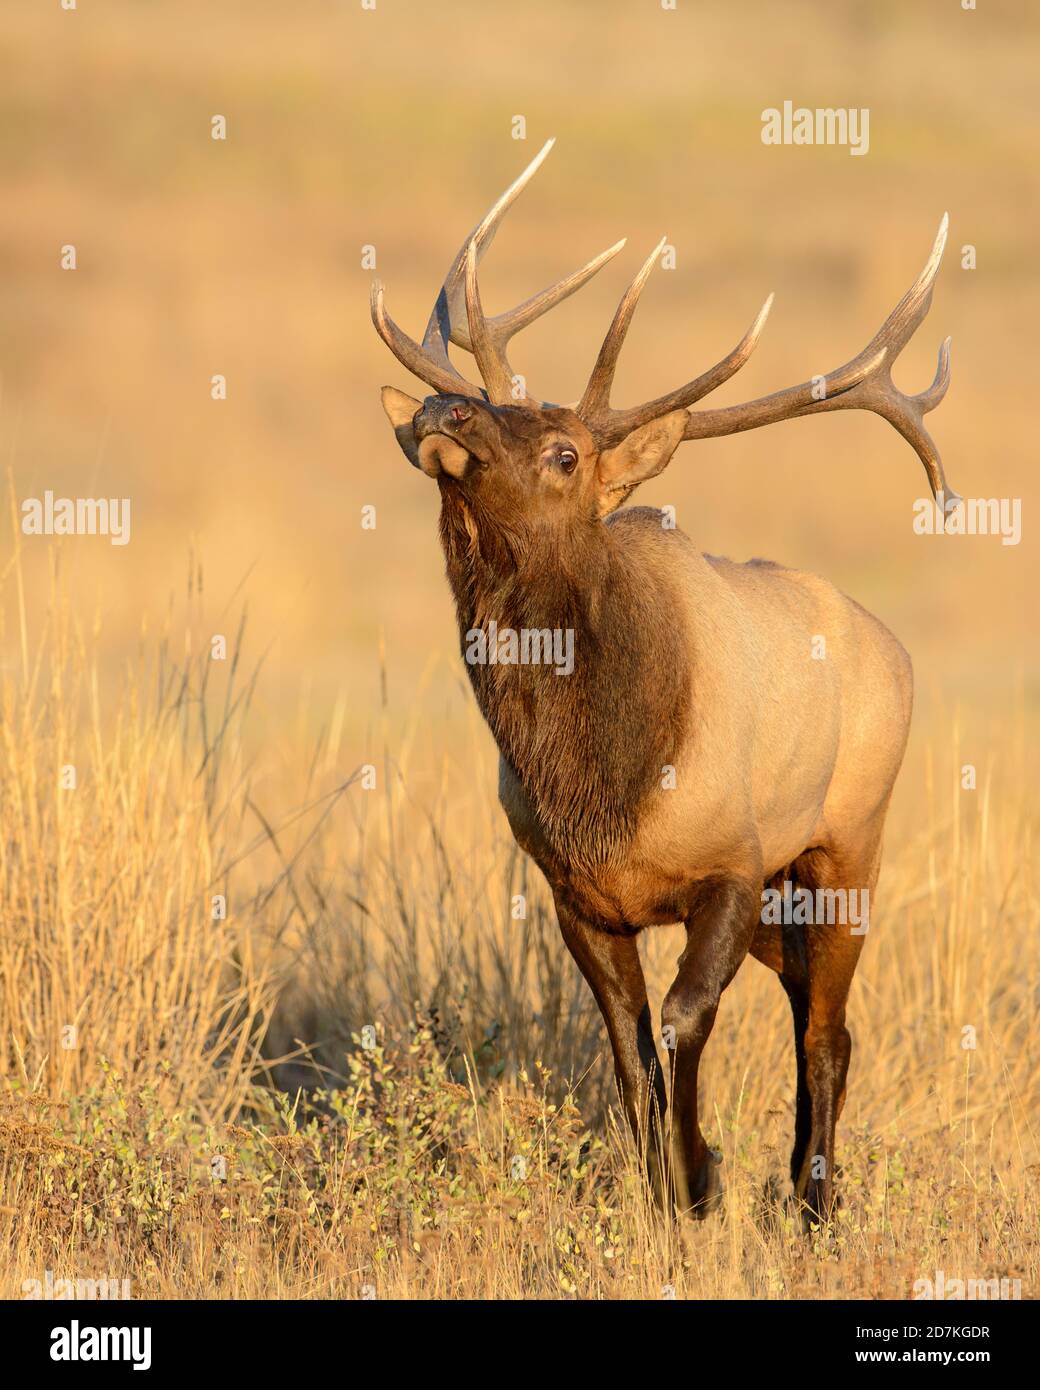 Bull elk (Cervus canadensis nelsoni) during the Autumnal mating rut, Western United States Stock Photo